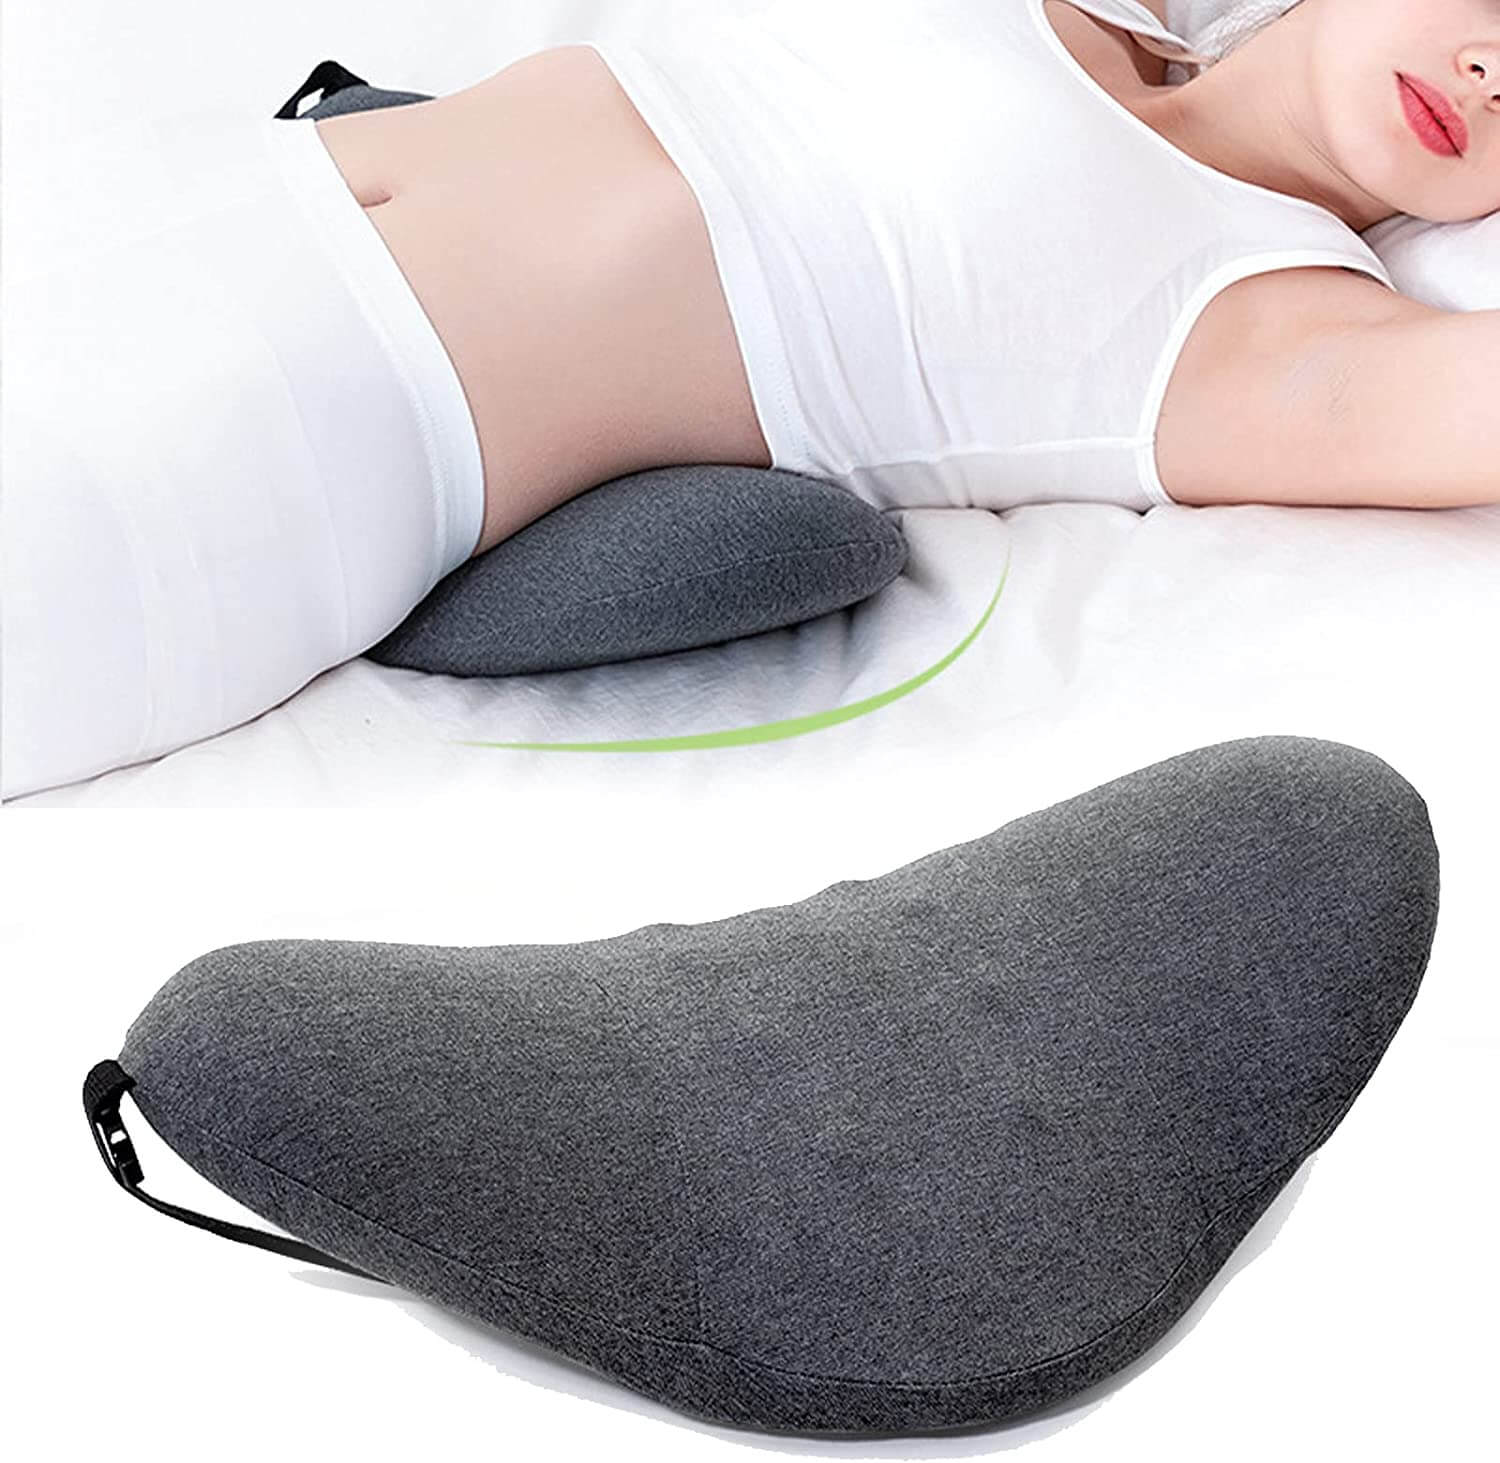 Lumbar Pillow For Sleeping Spinal Support Cushion Lower Back Pain